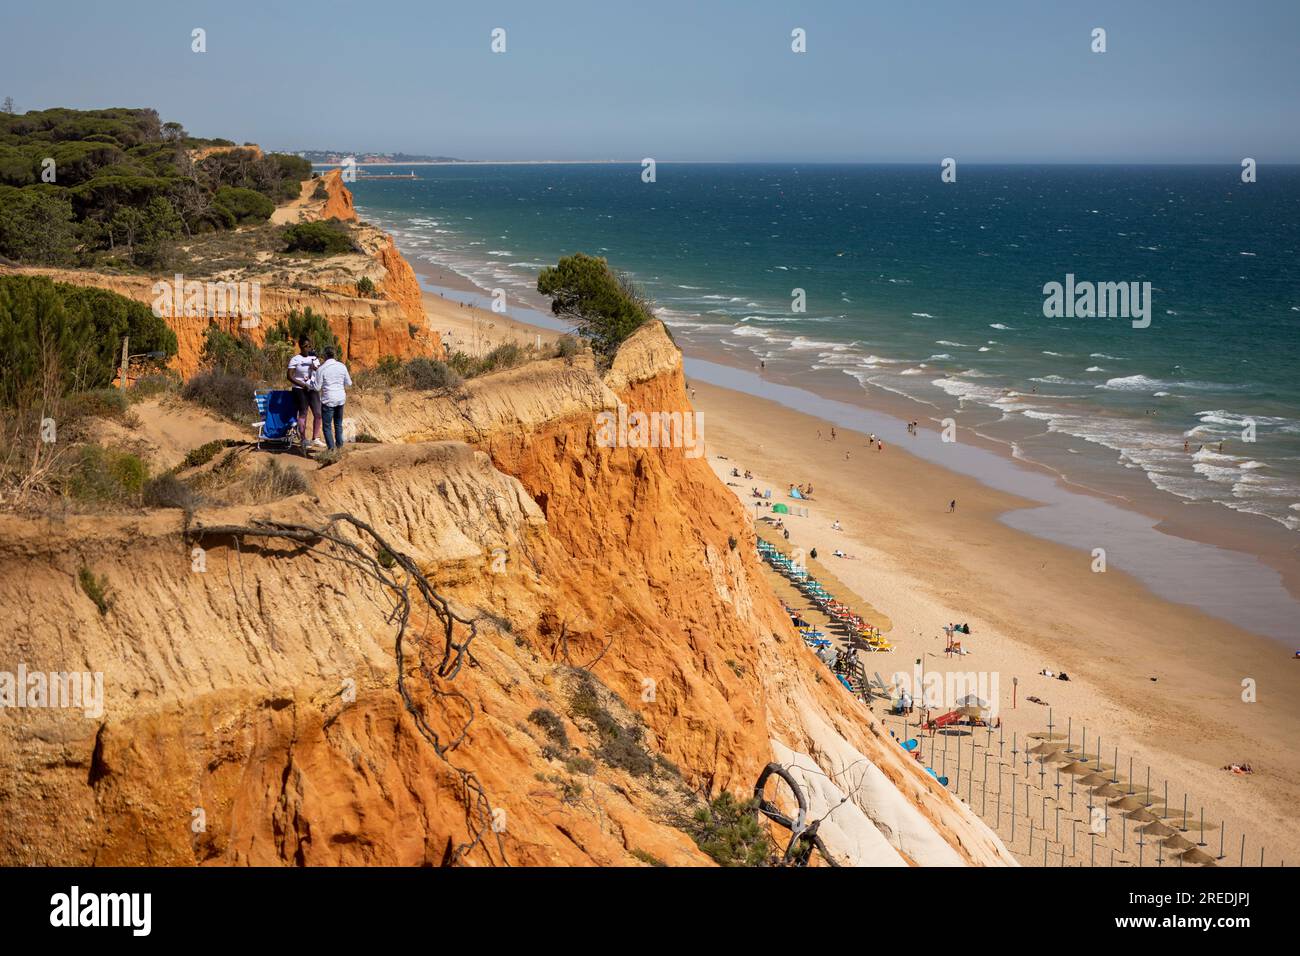 Landscape shoreline view of the beautiful viewpoint in Olhos de Agua to the falesia beach, Portugal. Stock Photo